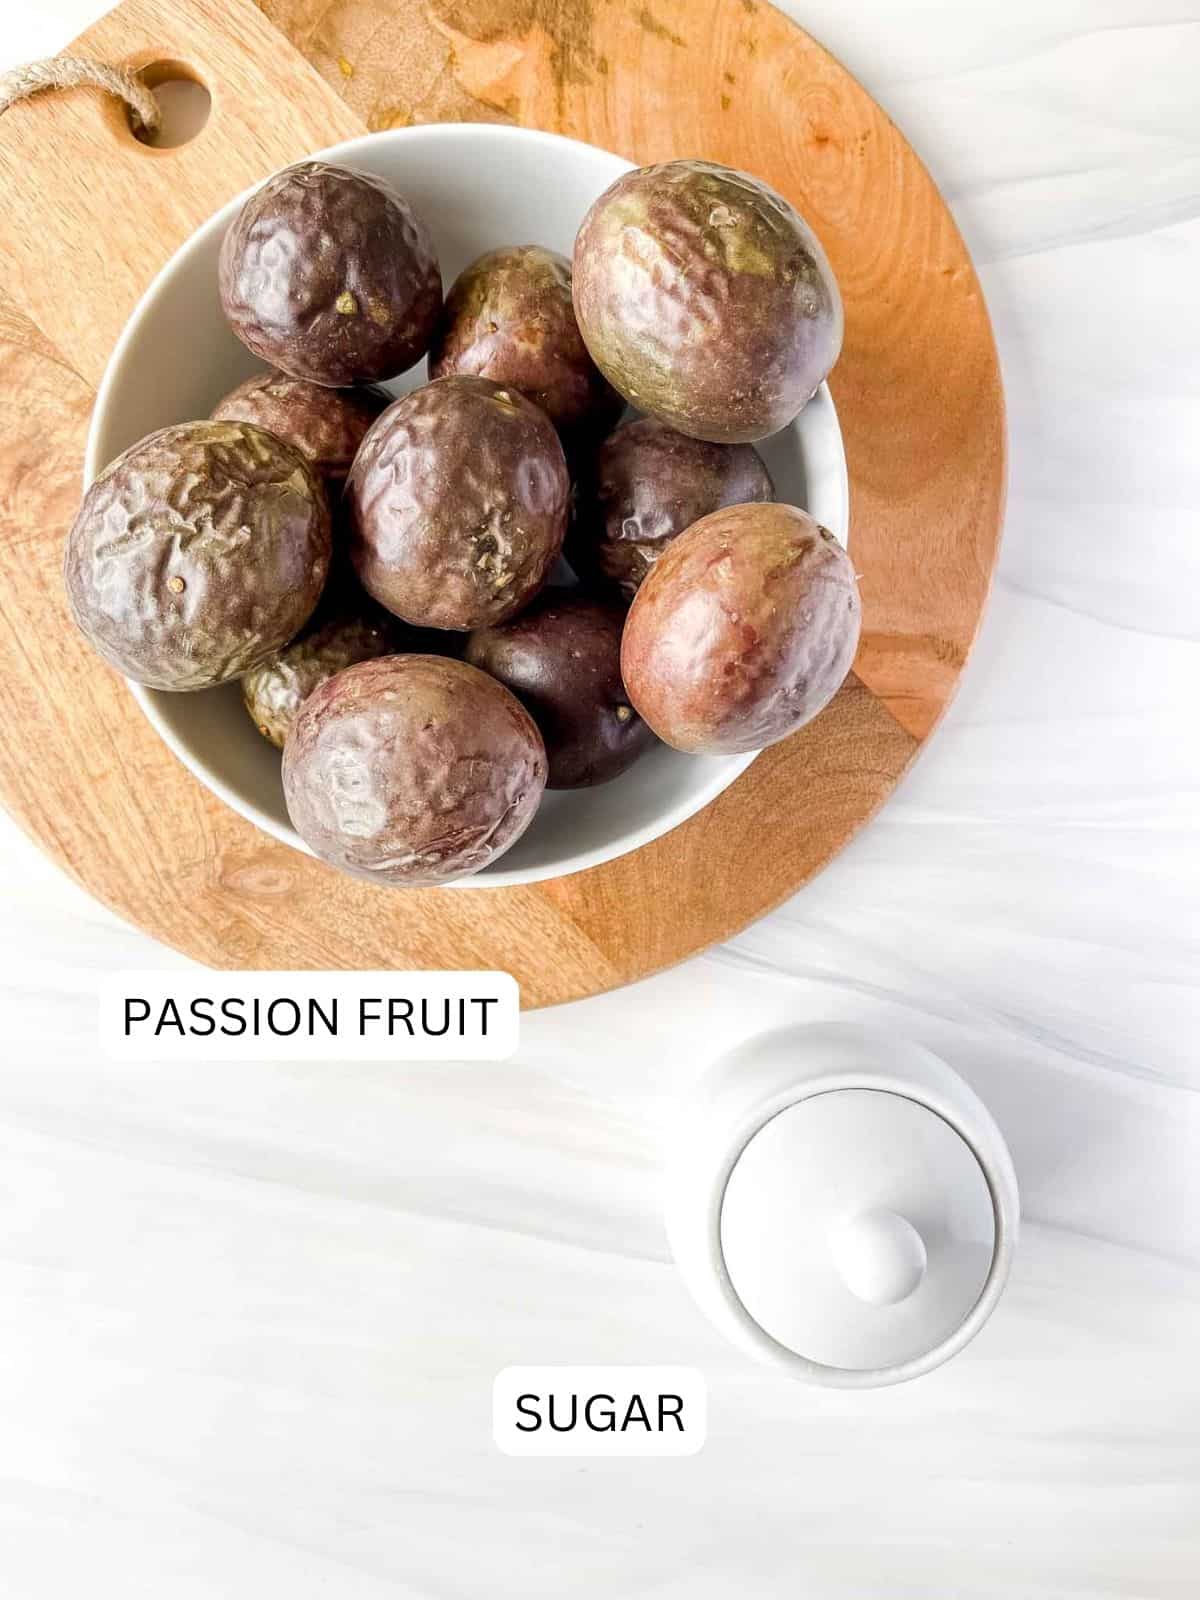 labelled passion fruit in a white bowl on a wooden board and sugar in a white sugar bowl.